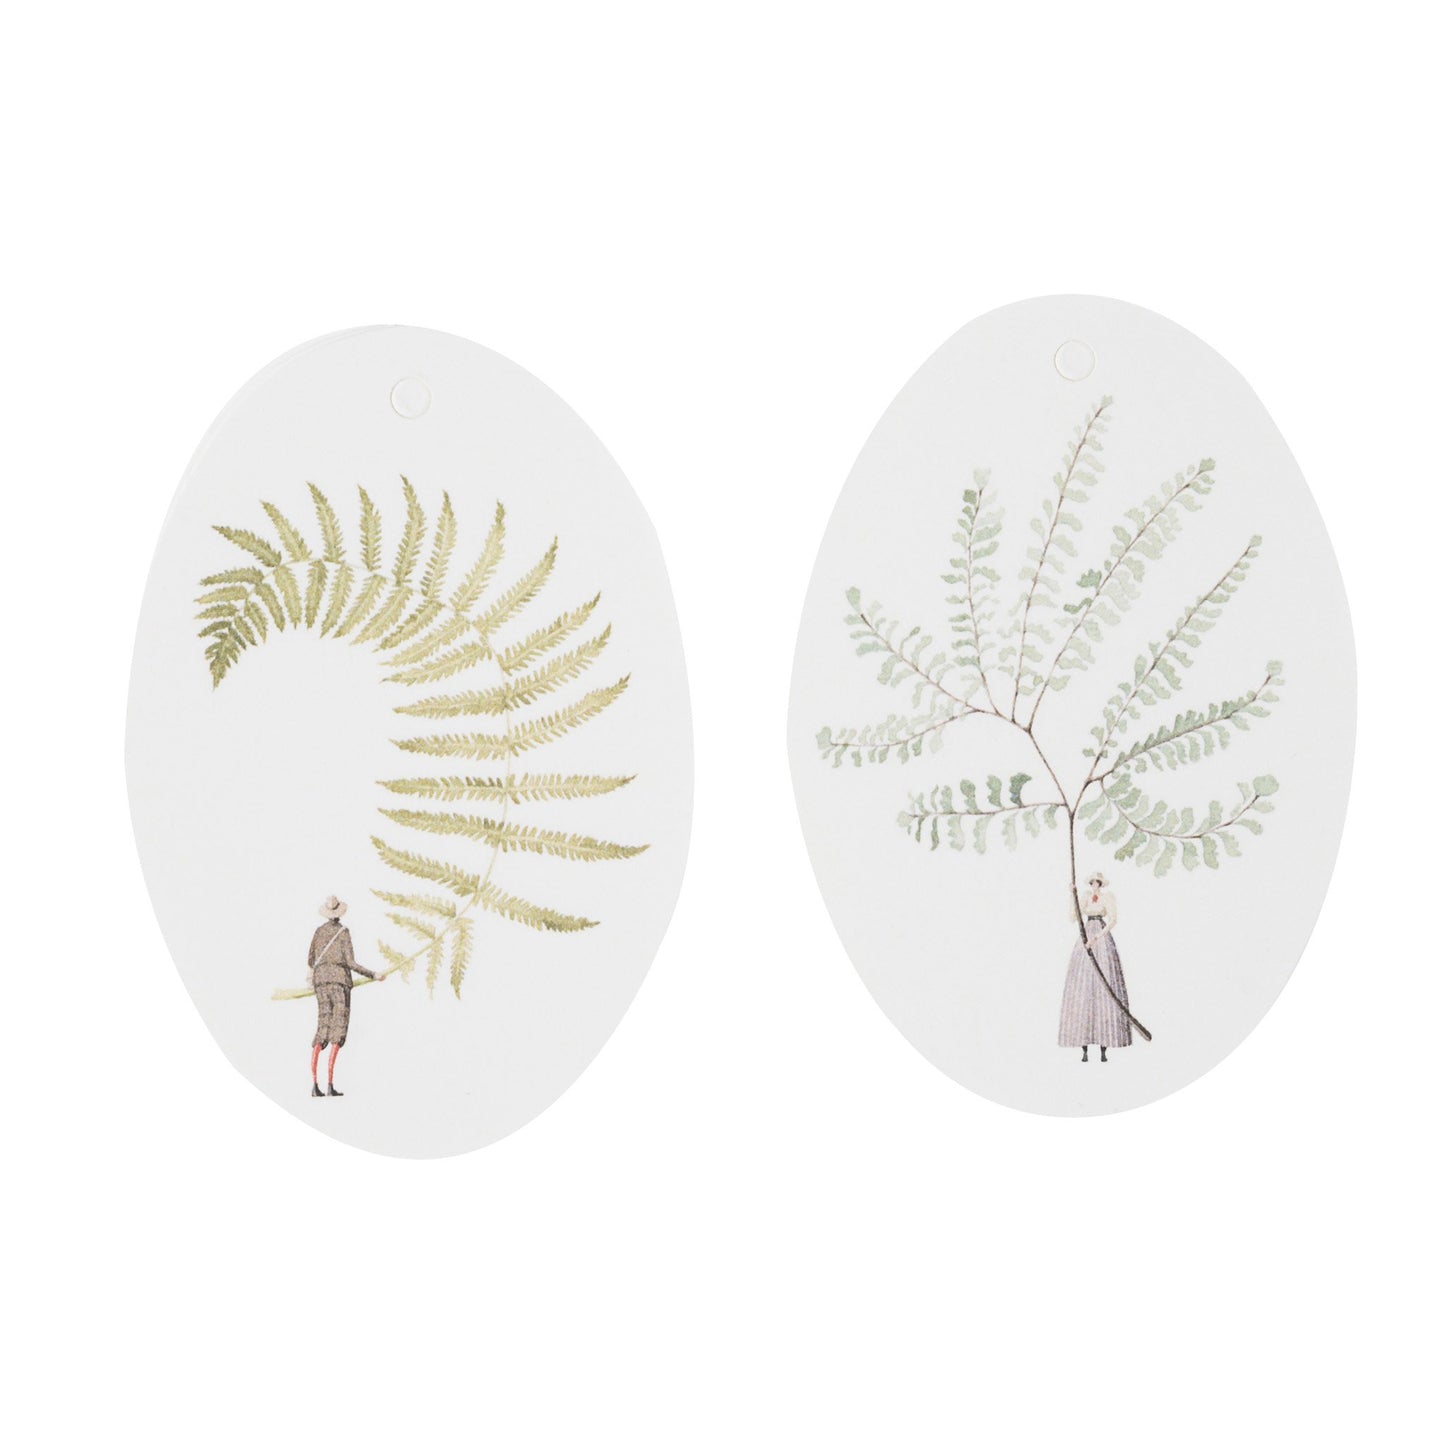 gift tags, tags, ferns, made in england, illustration